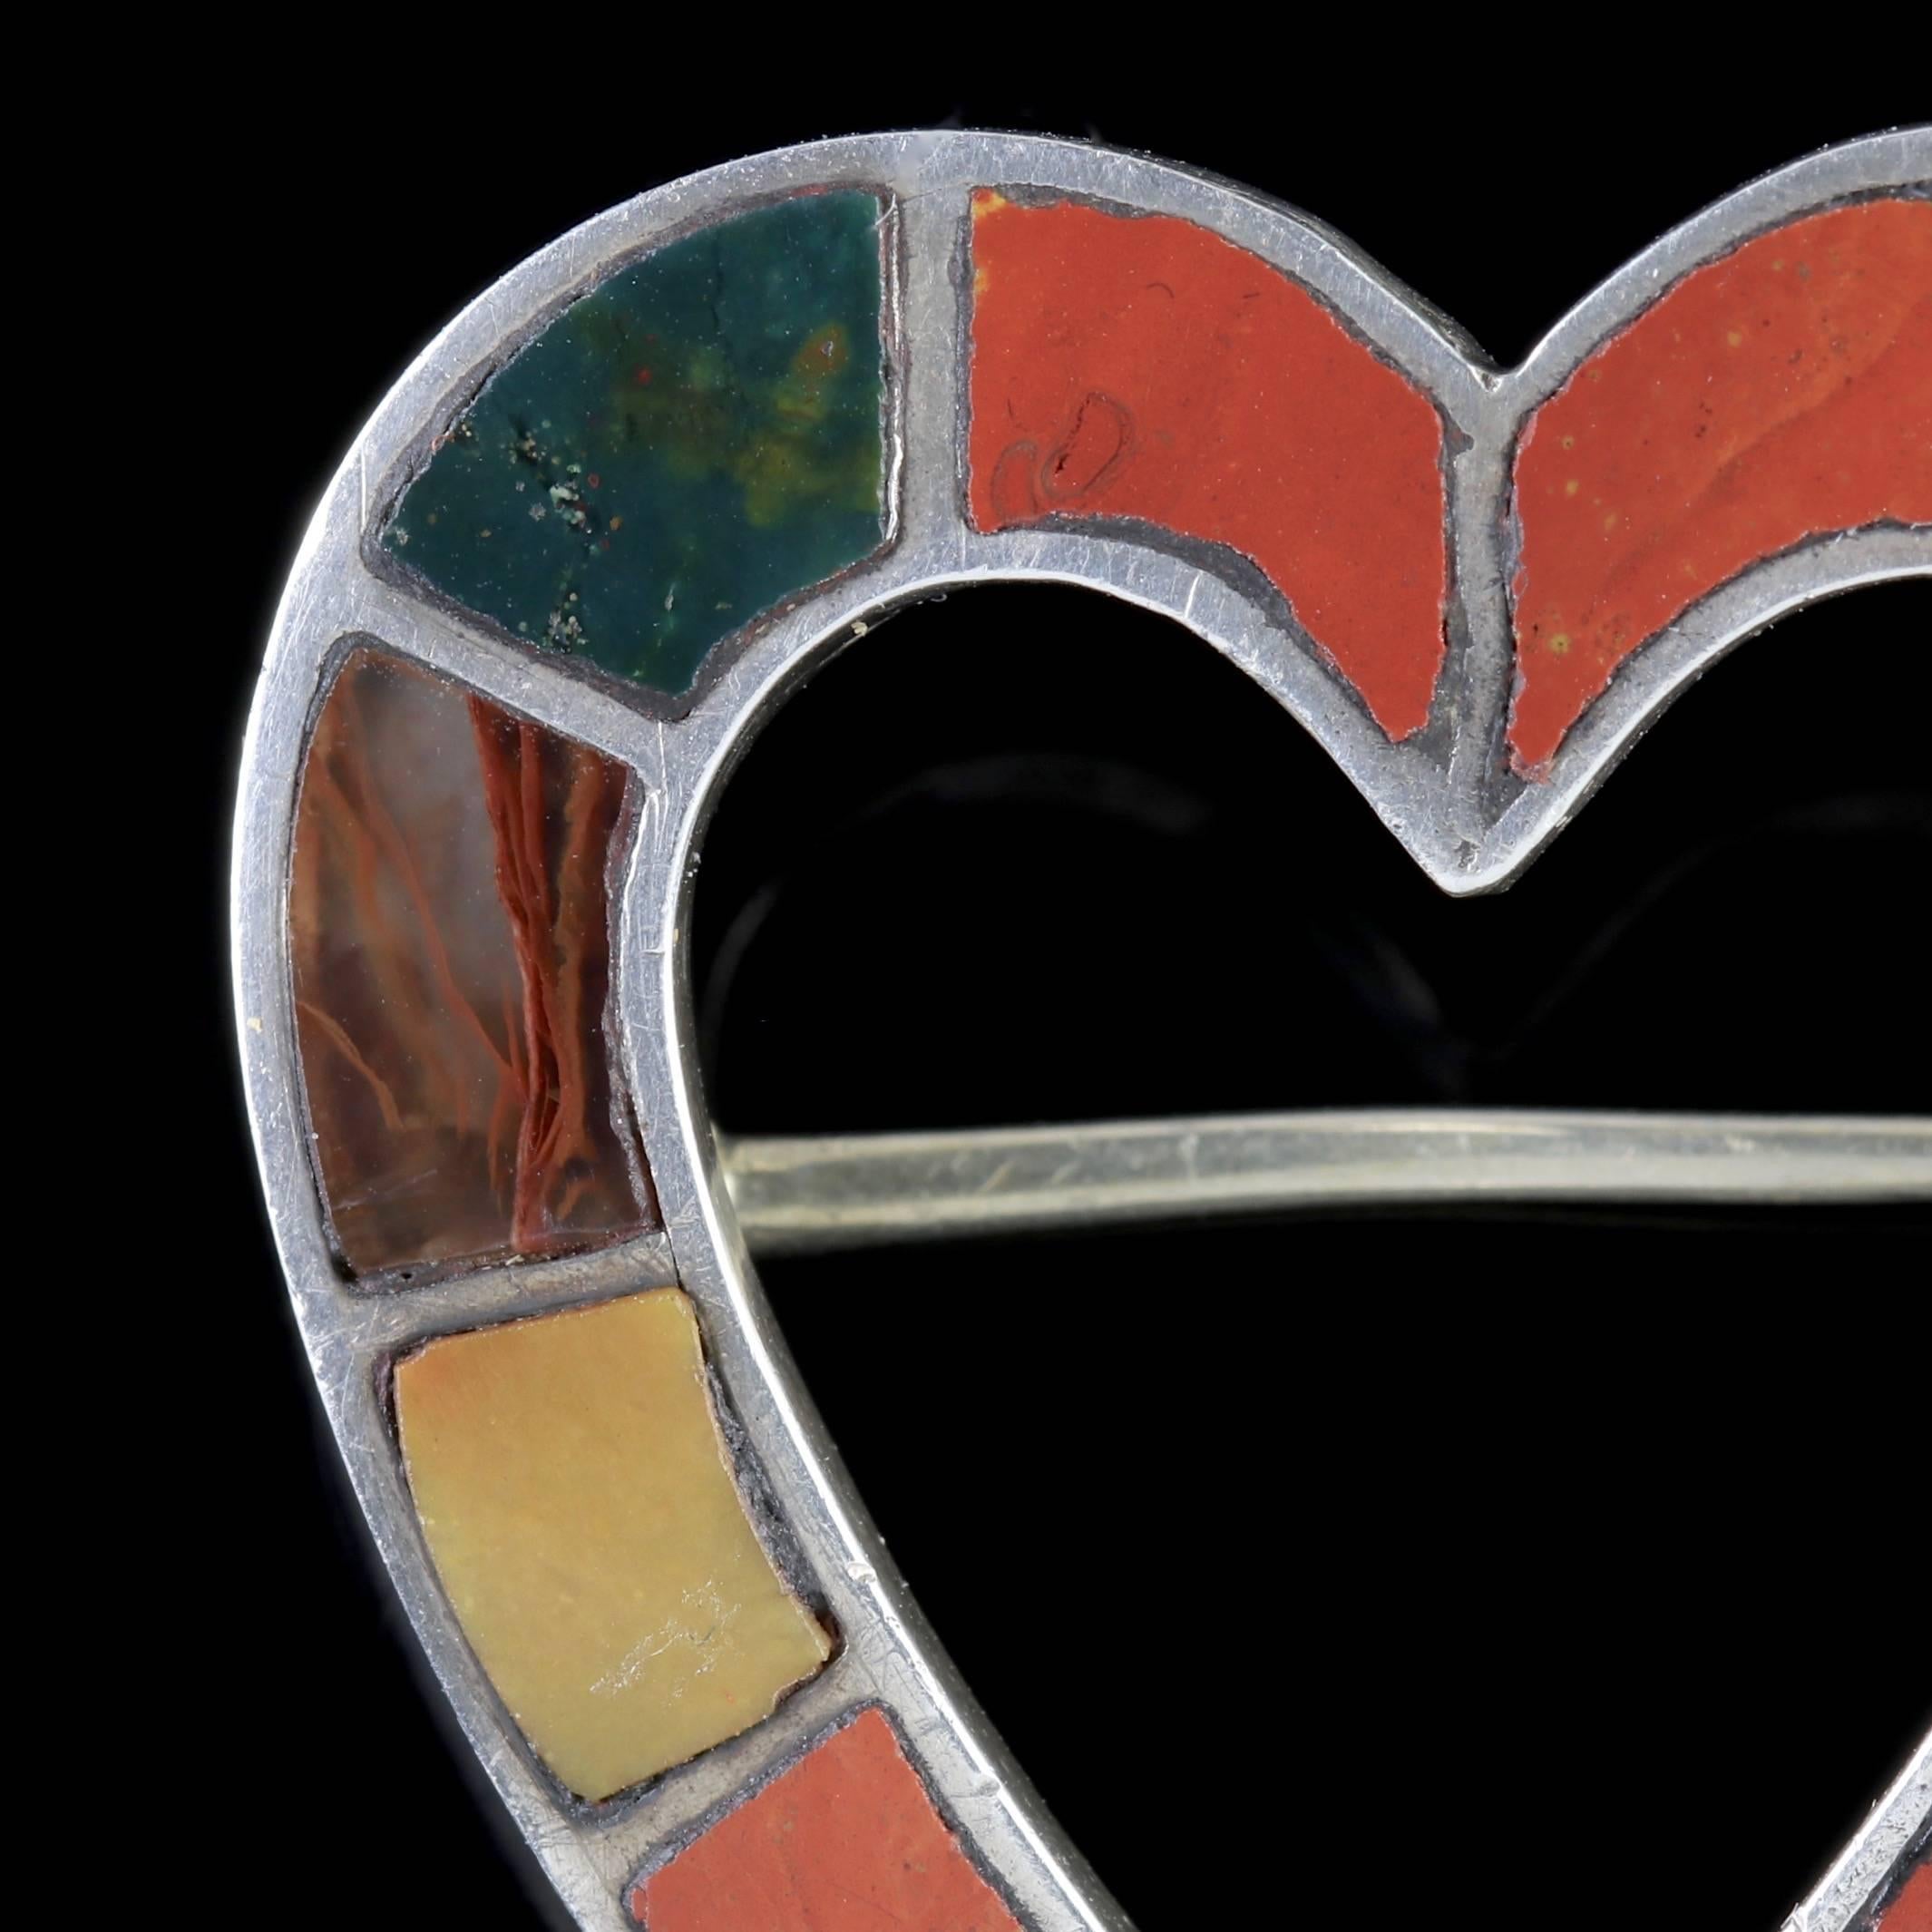 To read more please click continue reading below-

This highly collectable Antique Victorian Scottish heart brooch is Circa 1860.

Scottish jewellery was made popular by Queen Victoria as it became a souvenir of her frequent trips to Scotland and